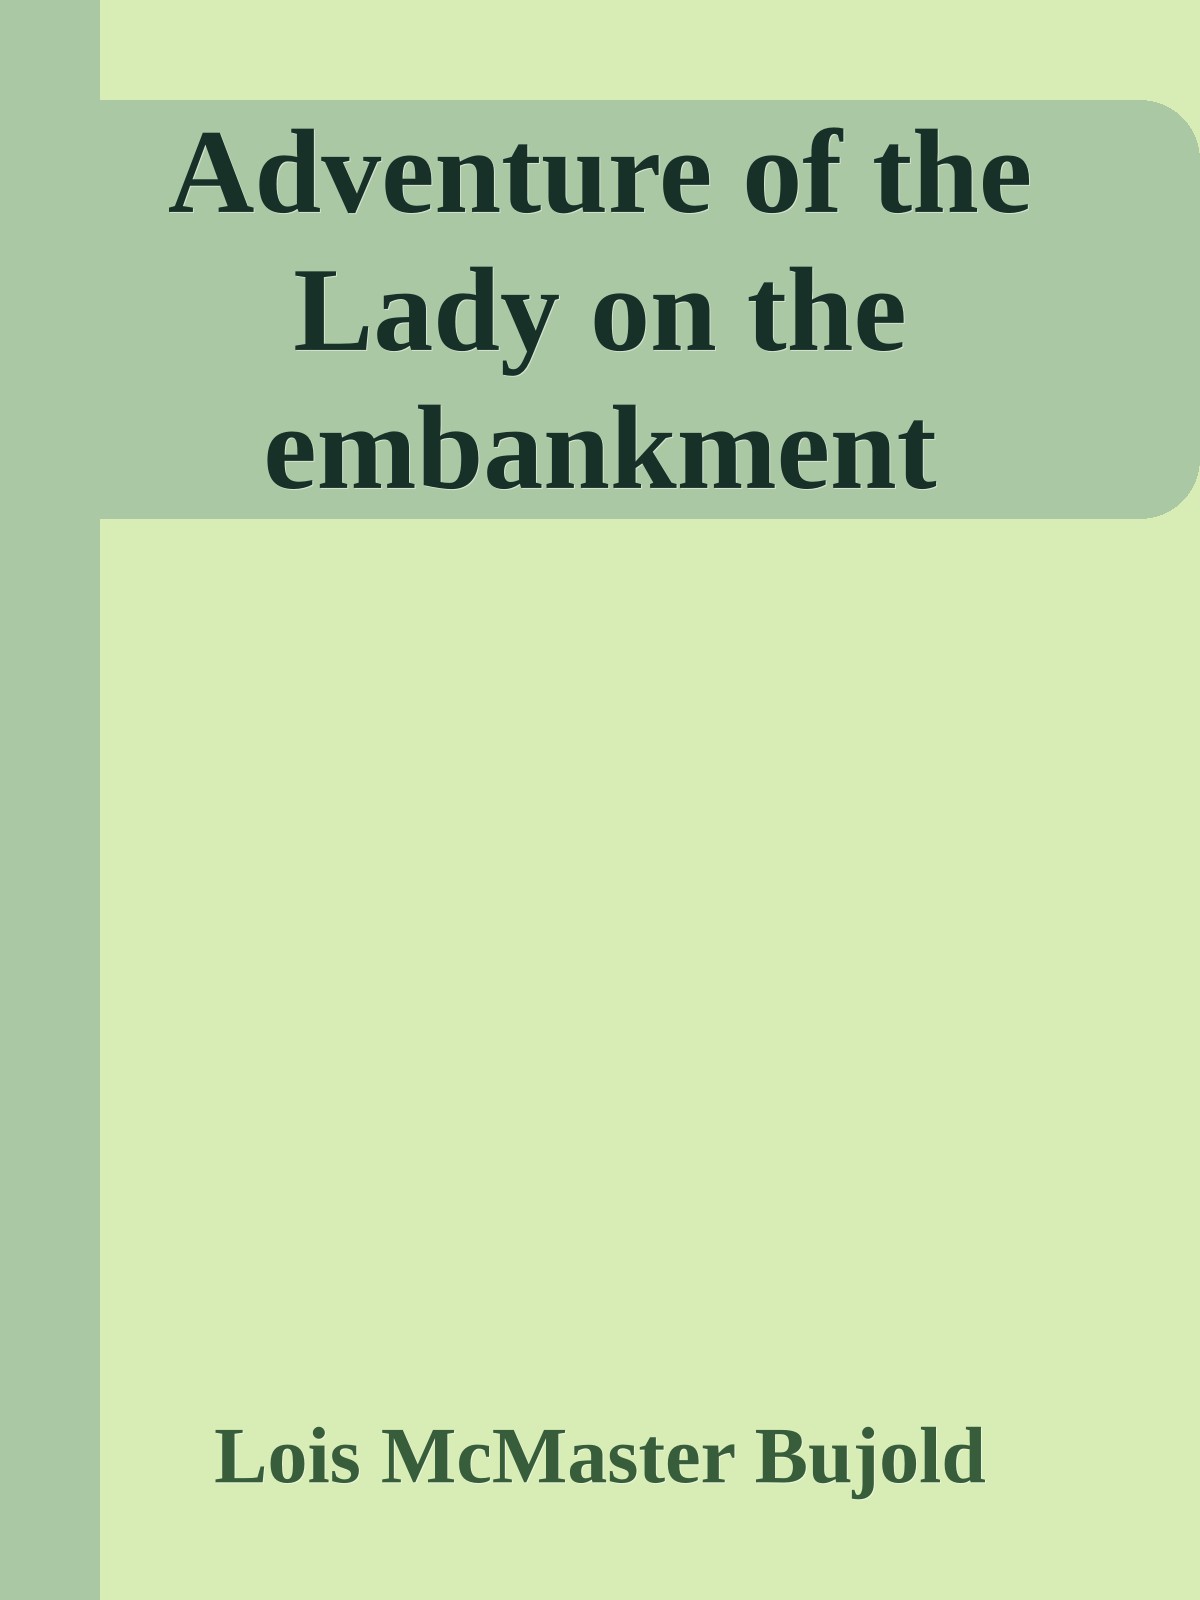 Adventure of the Lady on the embankment